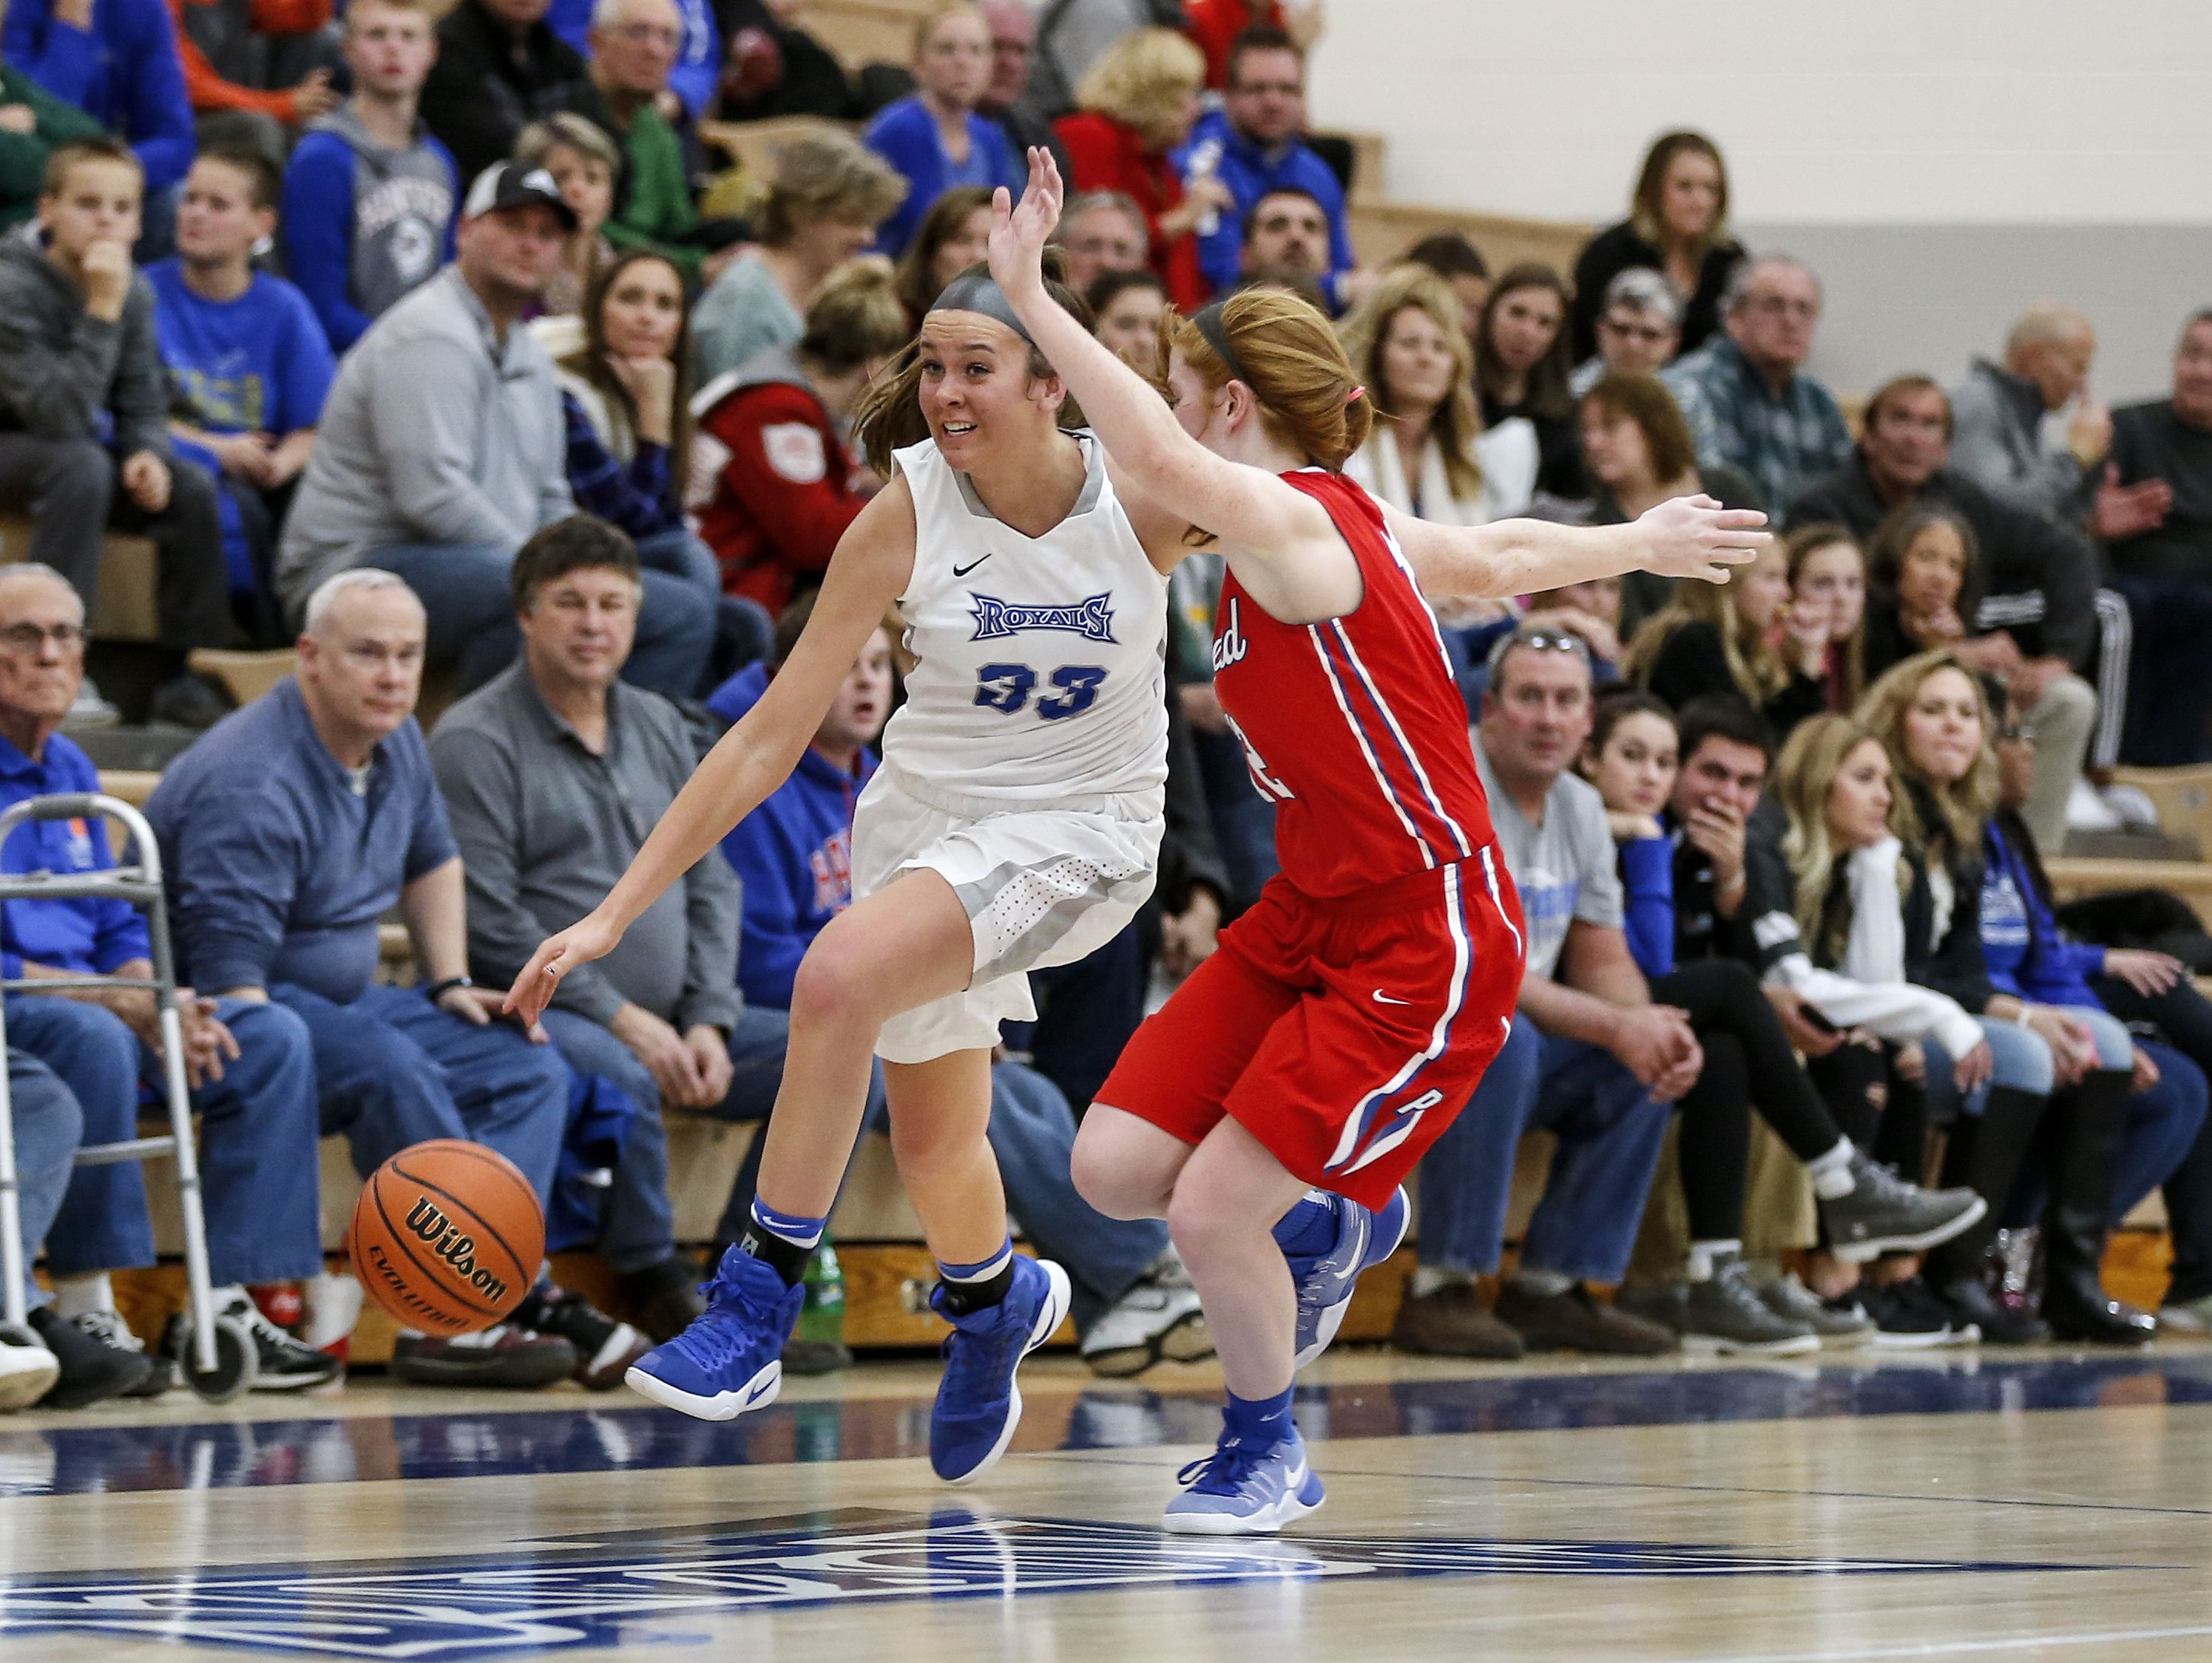 Hamilton Southeastern's Sydney Parrish (33) tries to get past Plainfield’s Samantha Olinger during Thursday's girls basketball game.